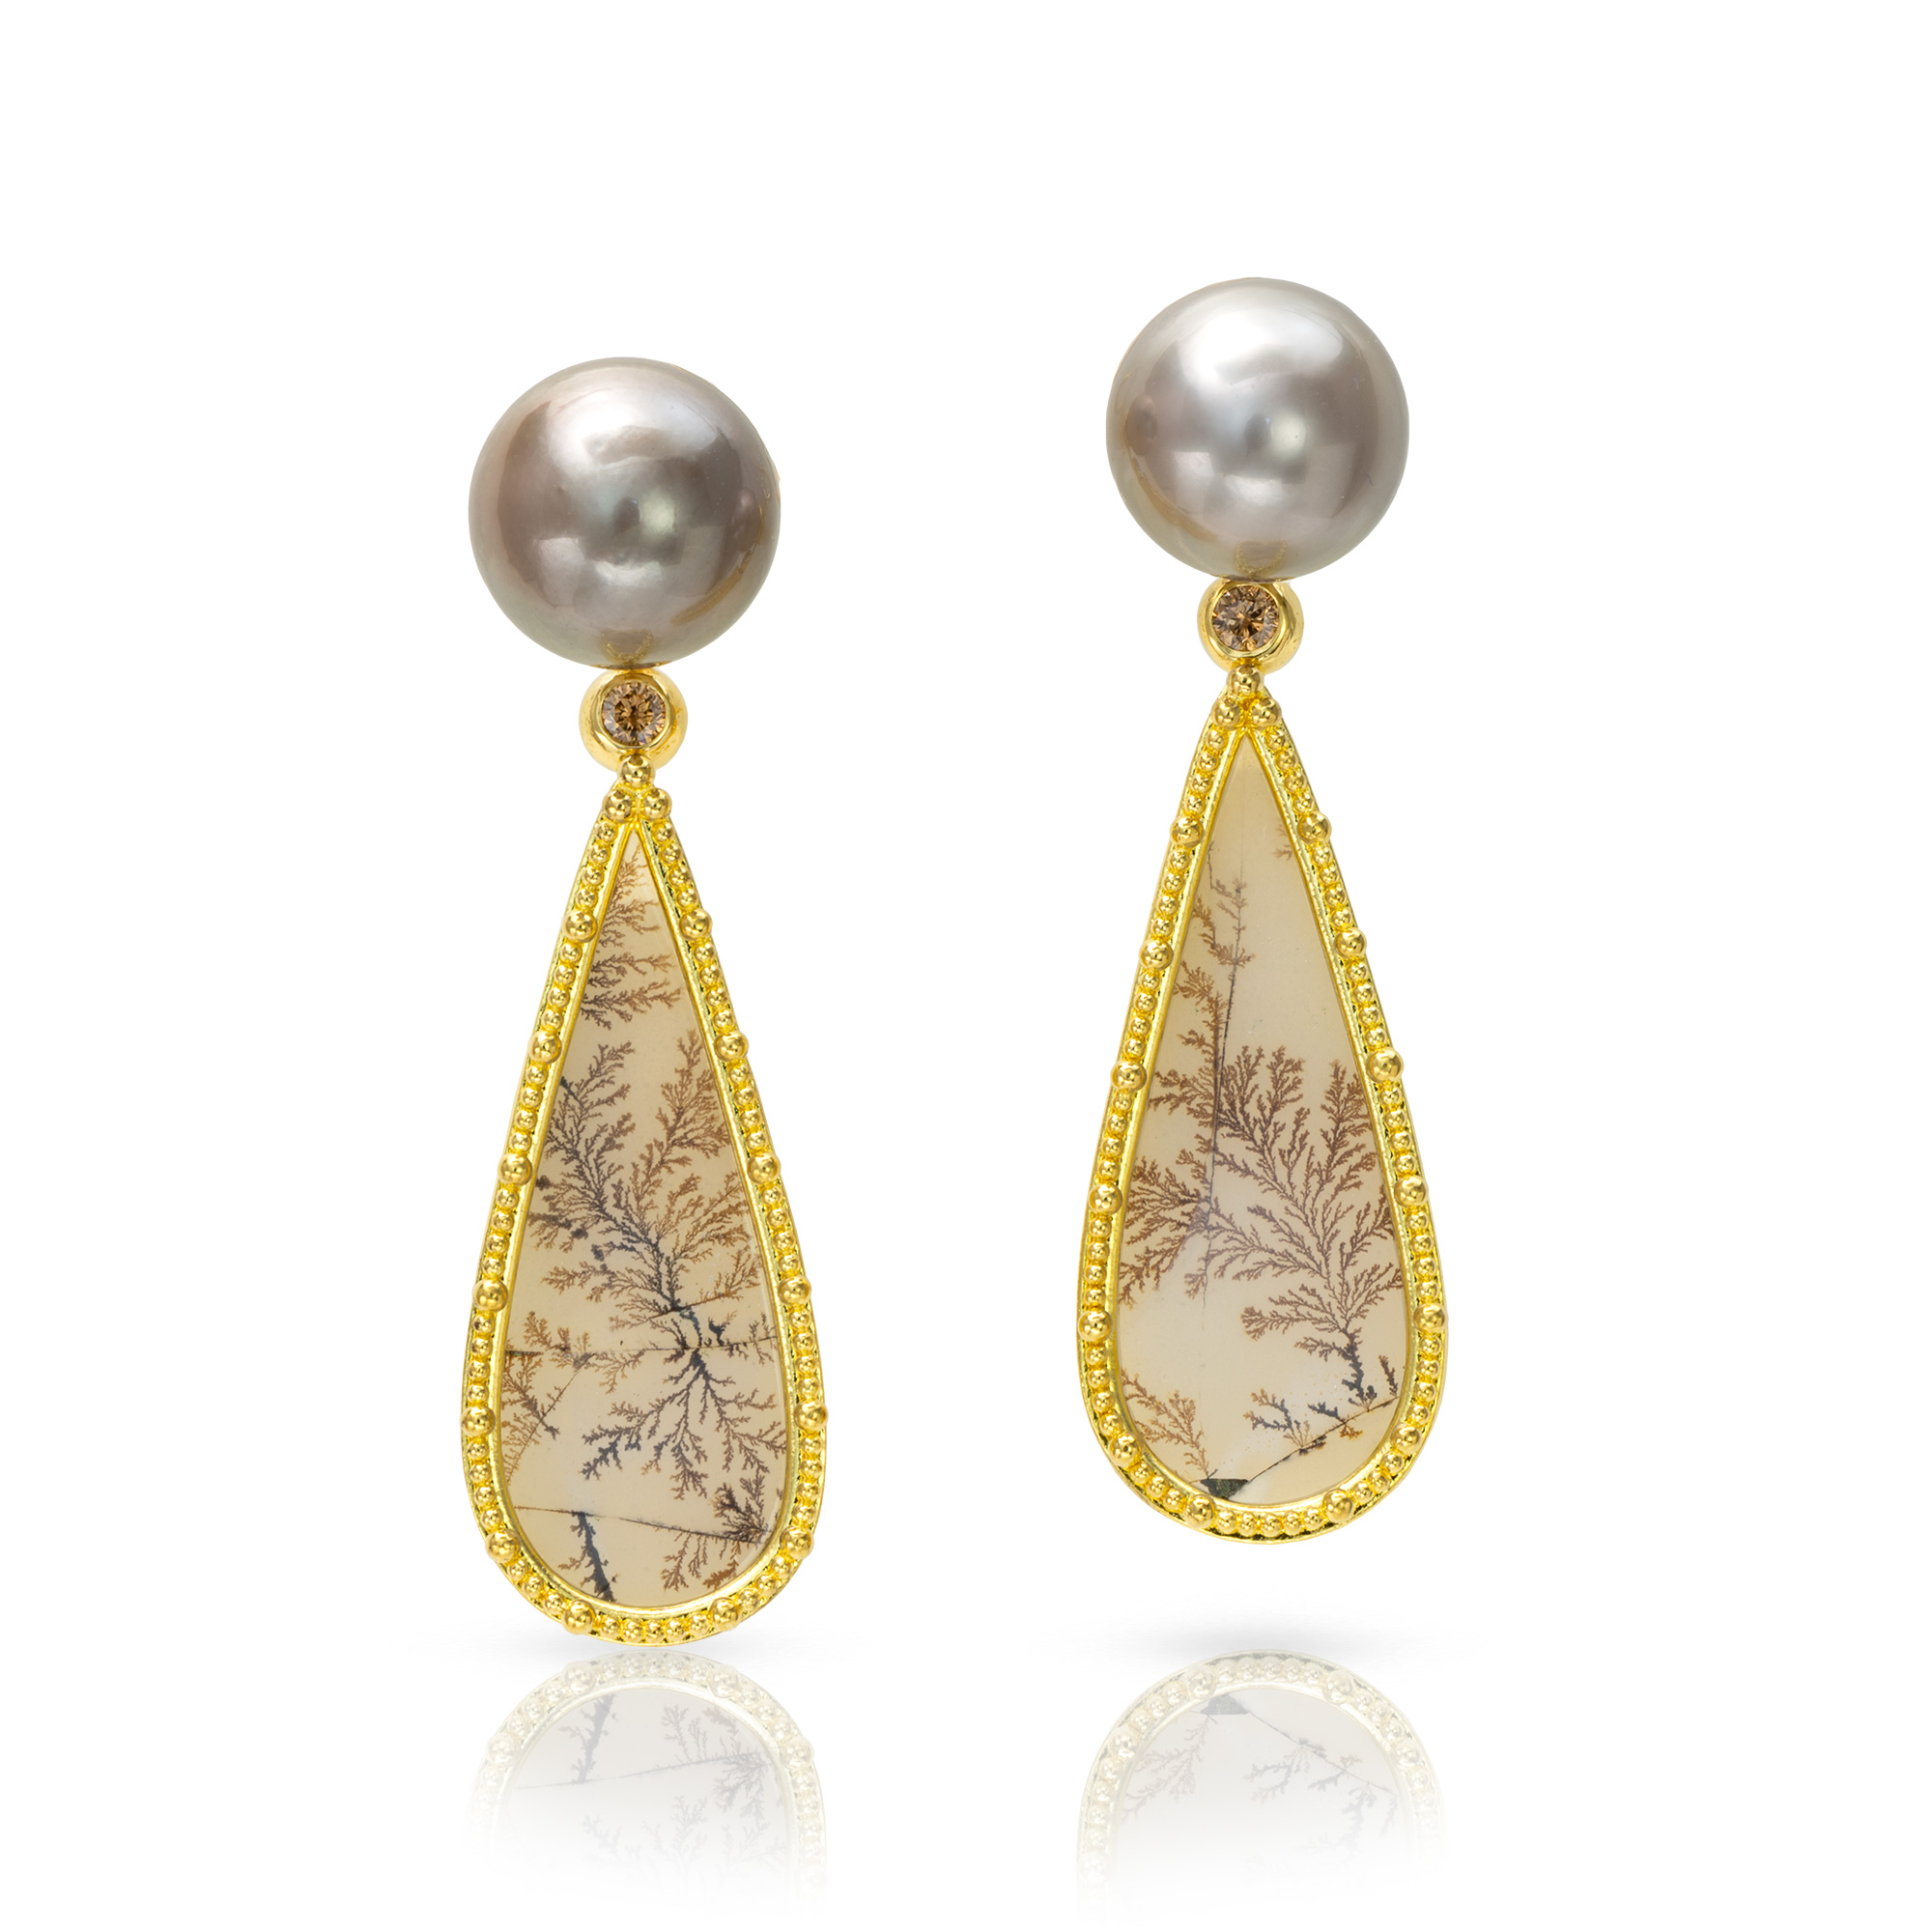 granulation earrings with pearls and dendritic agates